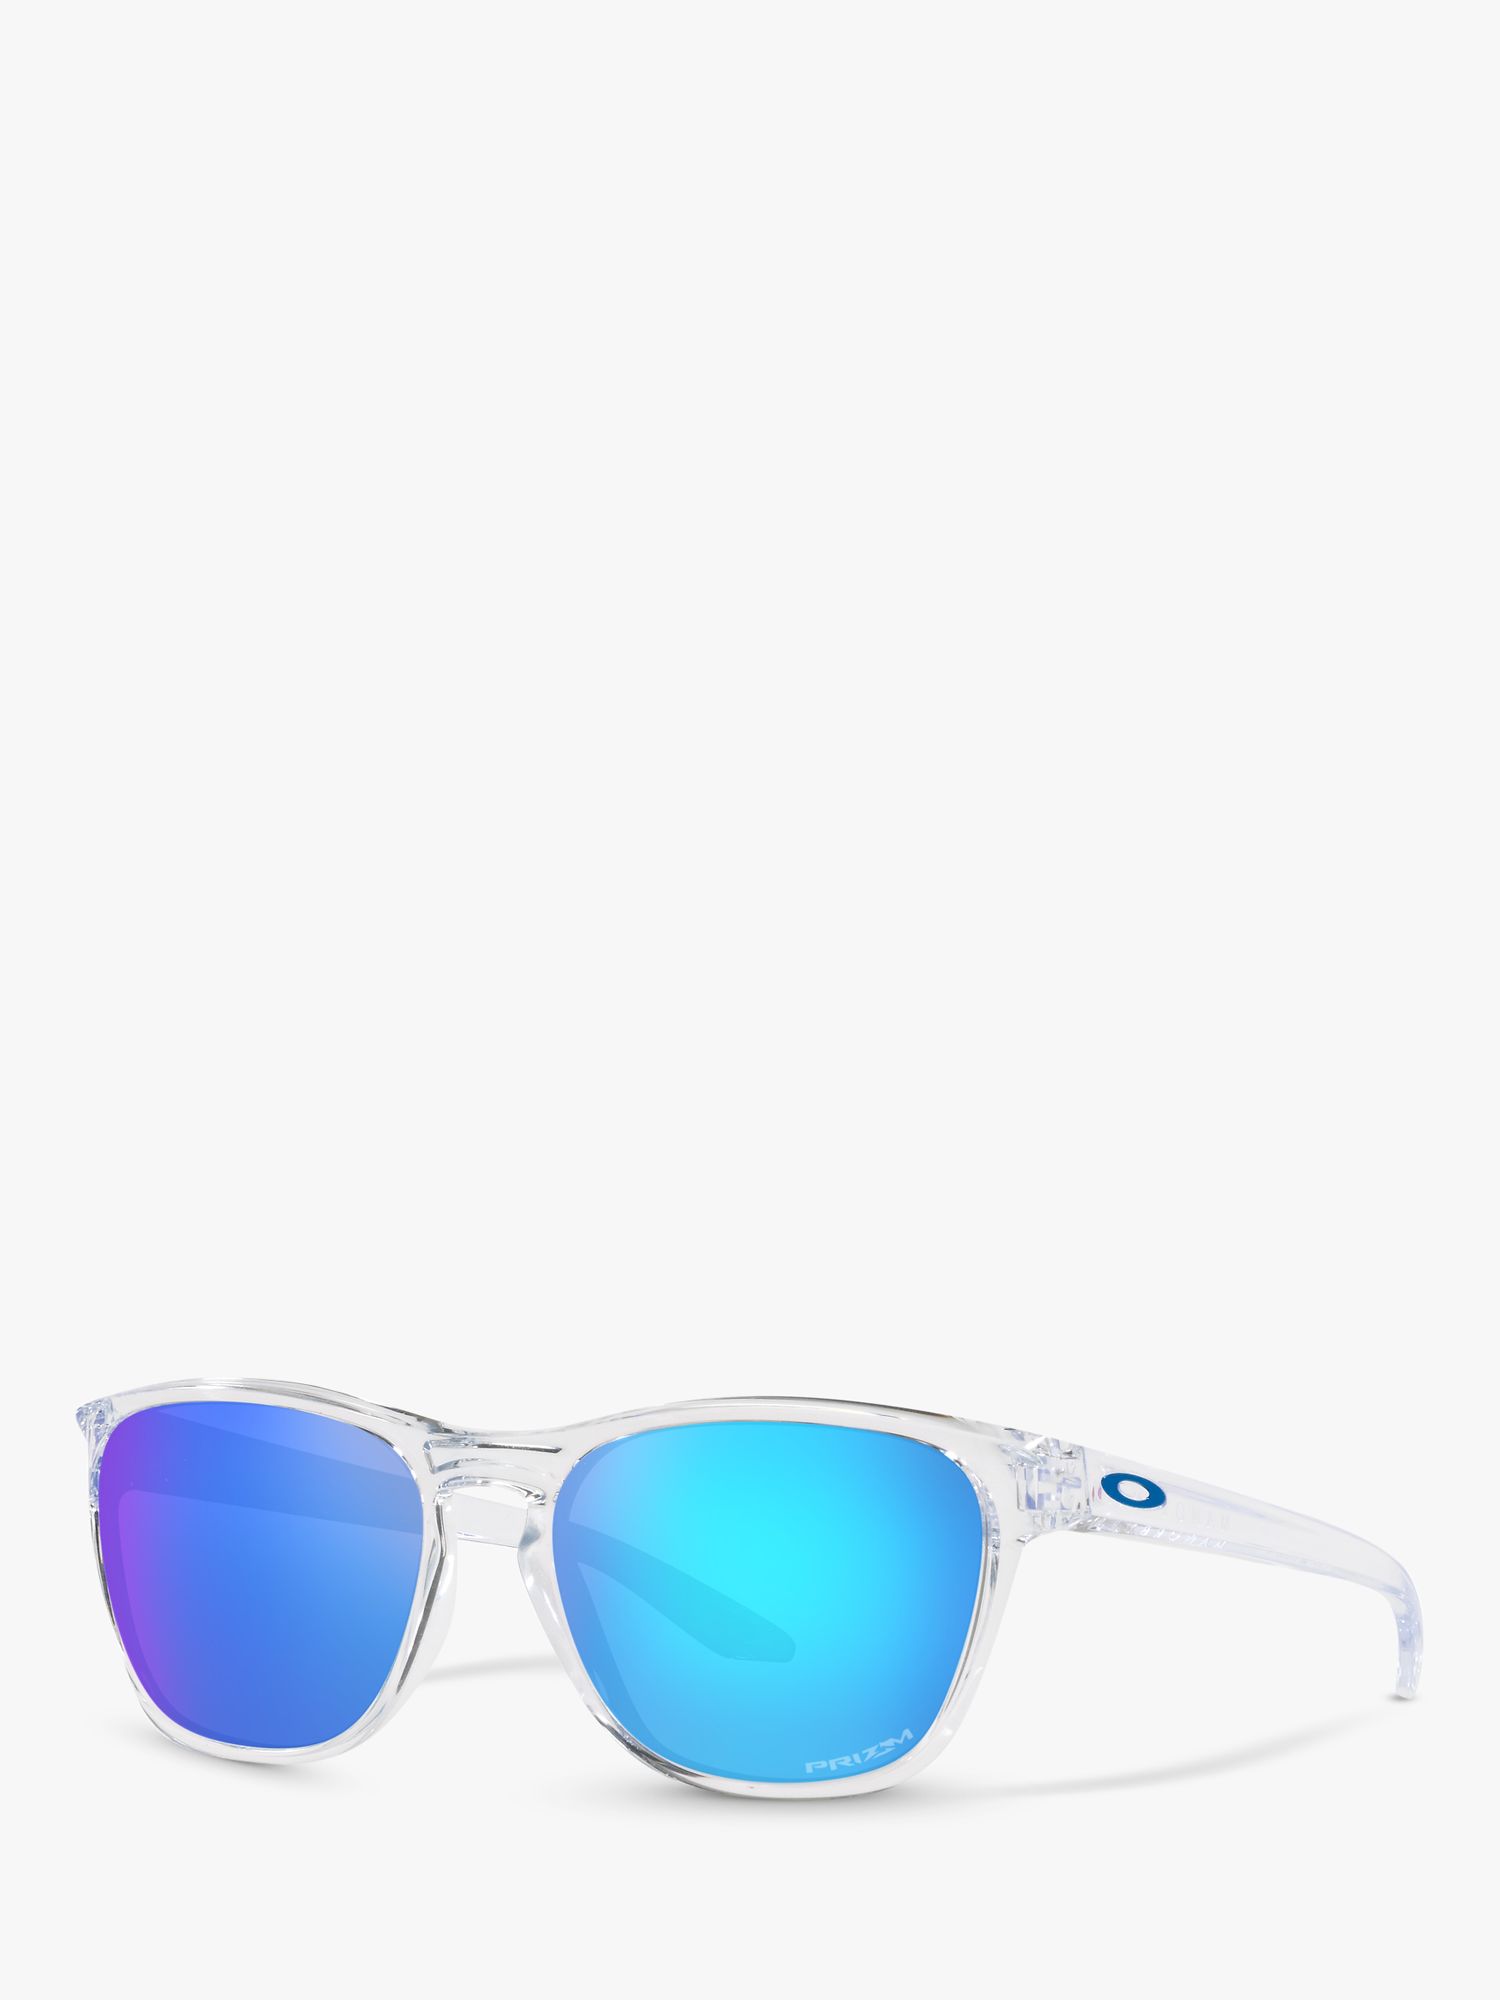 Oakley OO9479 Men's Manorburn Prizm Square Sunglasses, Polished  Clear/Mirror Blue at John Lewis & Partners